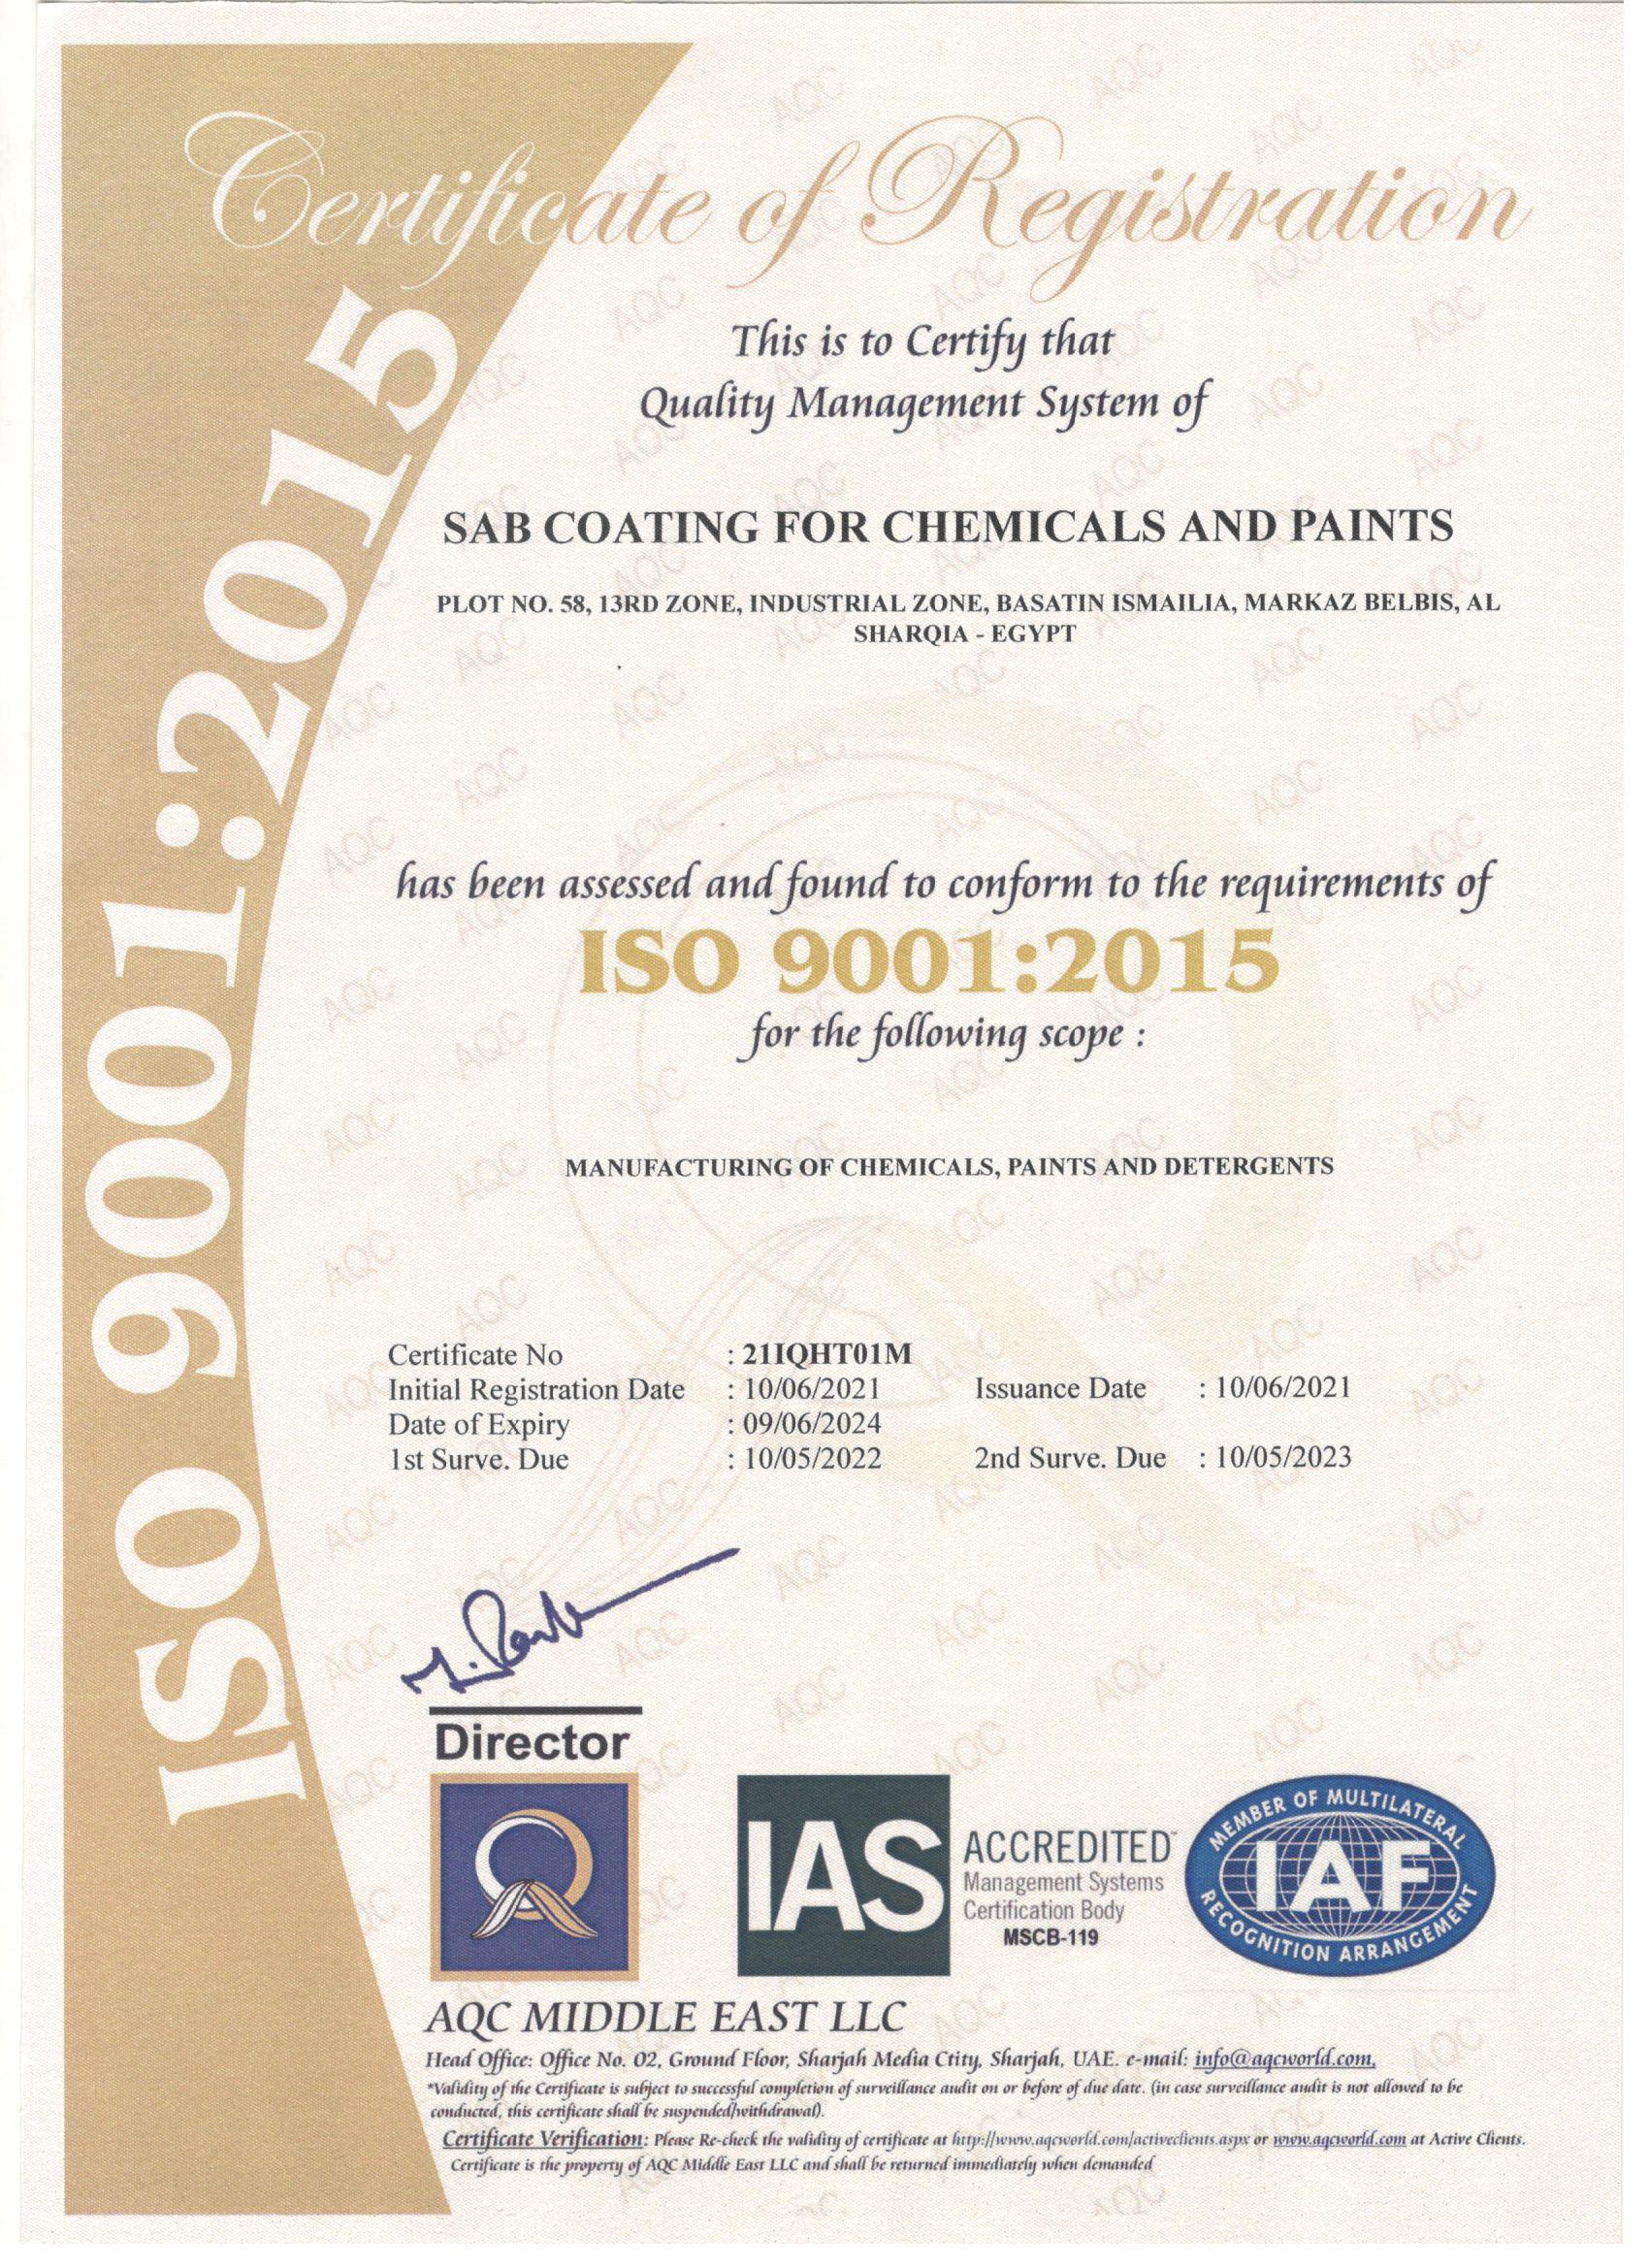 ISO 9001 - Sabcoatings For paints and chemicals